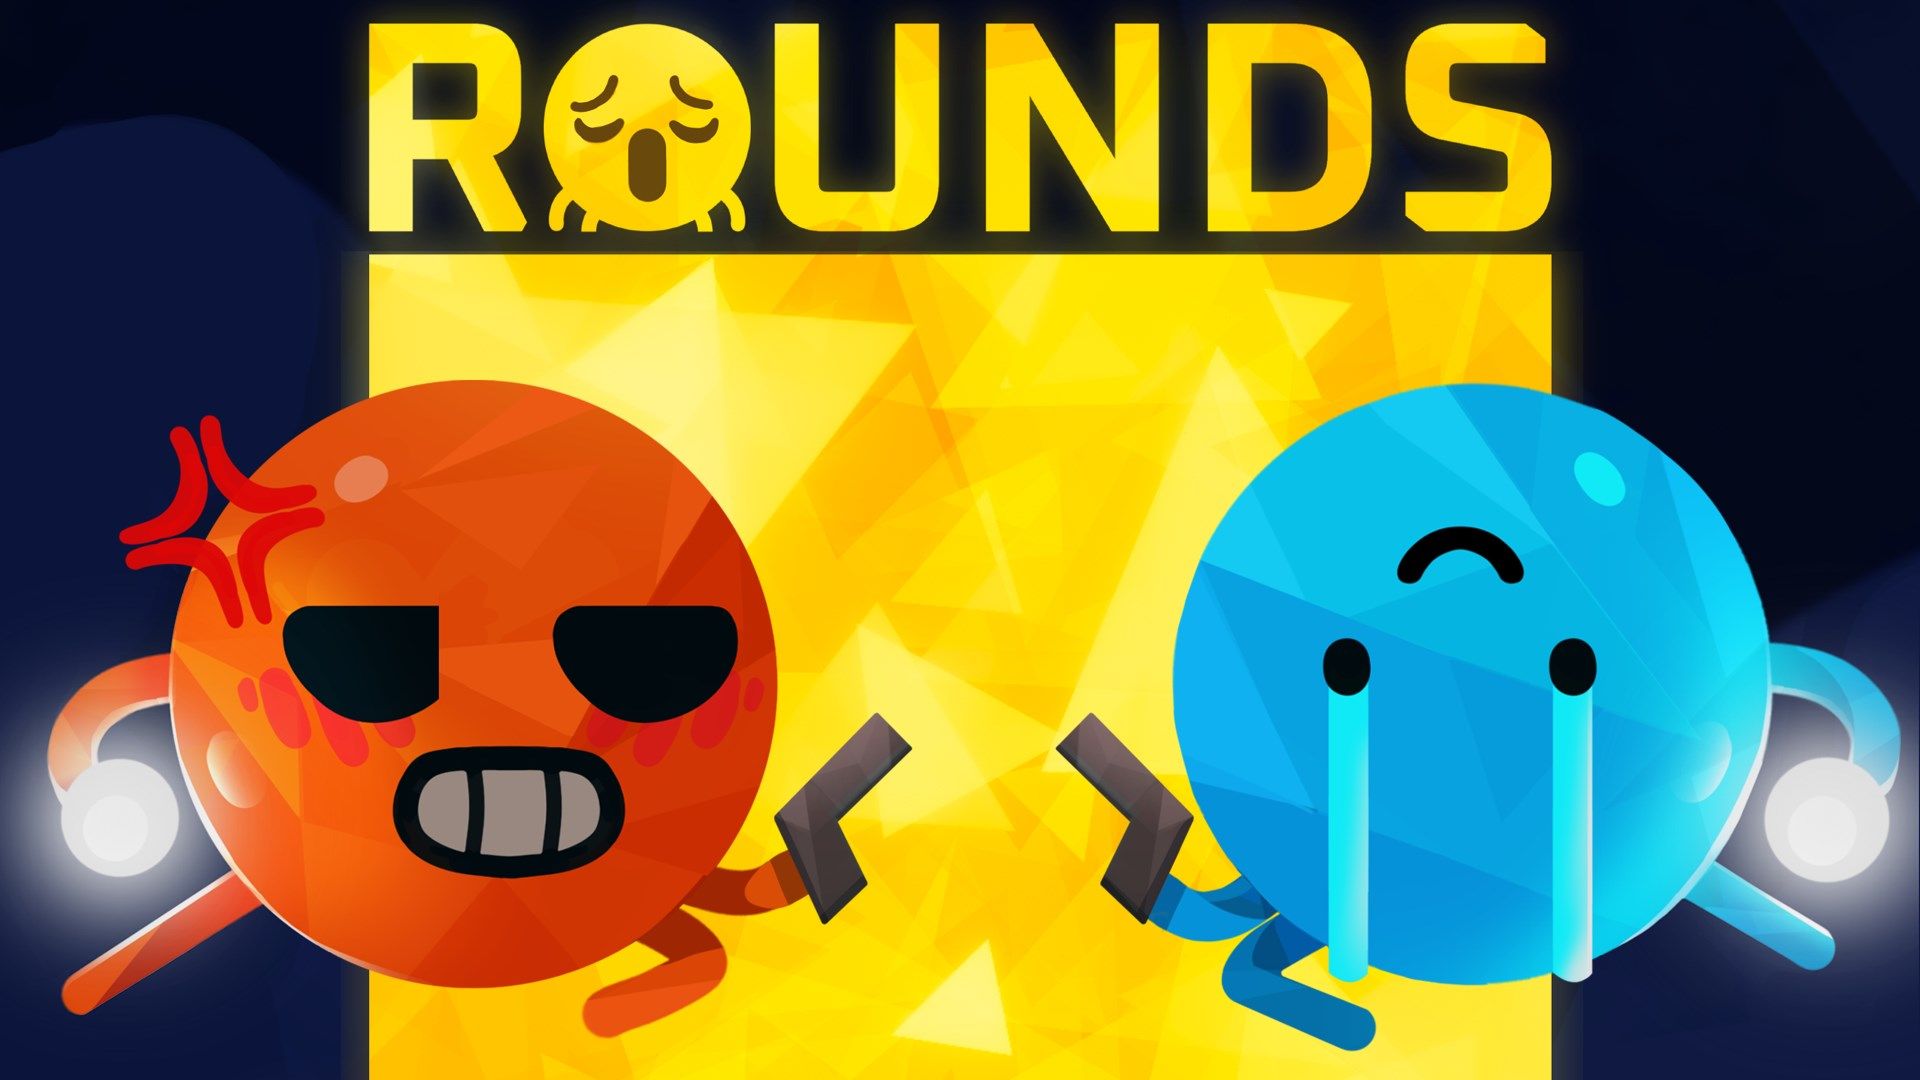 Rounders Image Asset